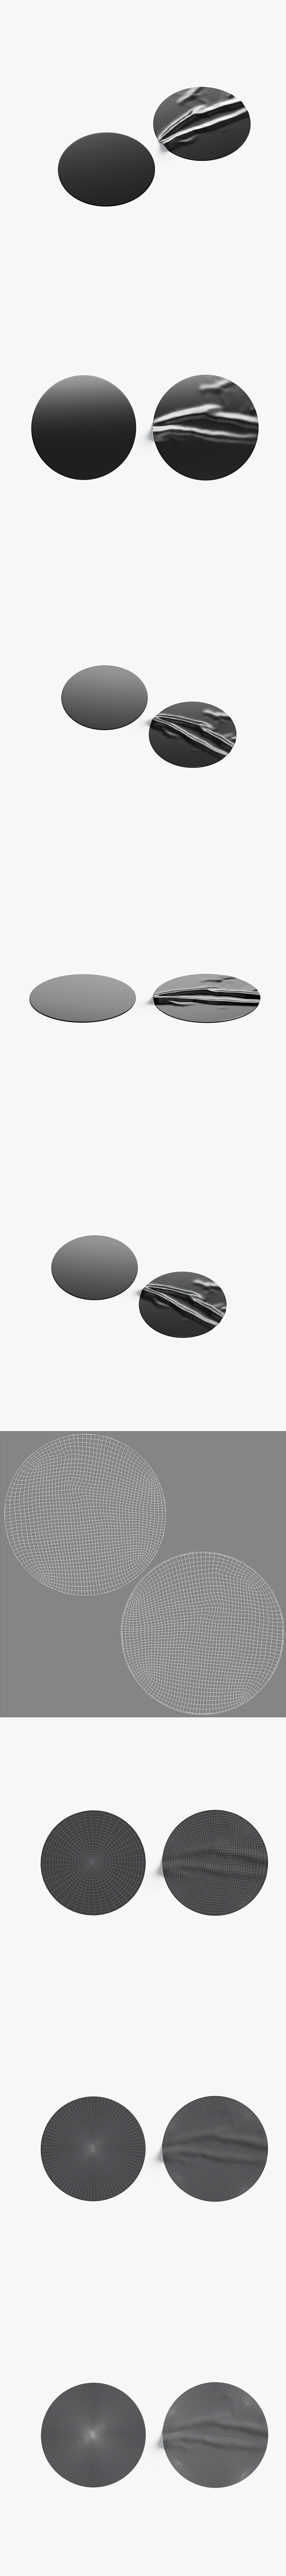 [DOWNLOAD]Two Black Round Stickers - sleek and wrinkly sticky tag